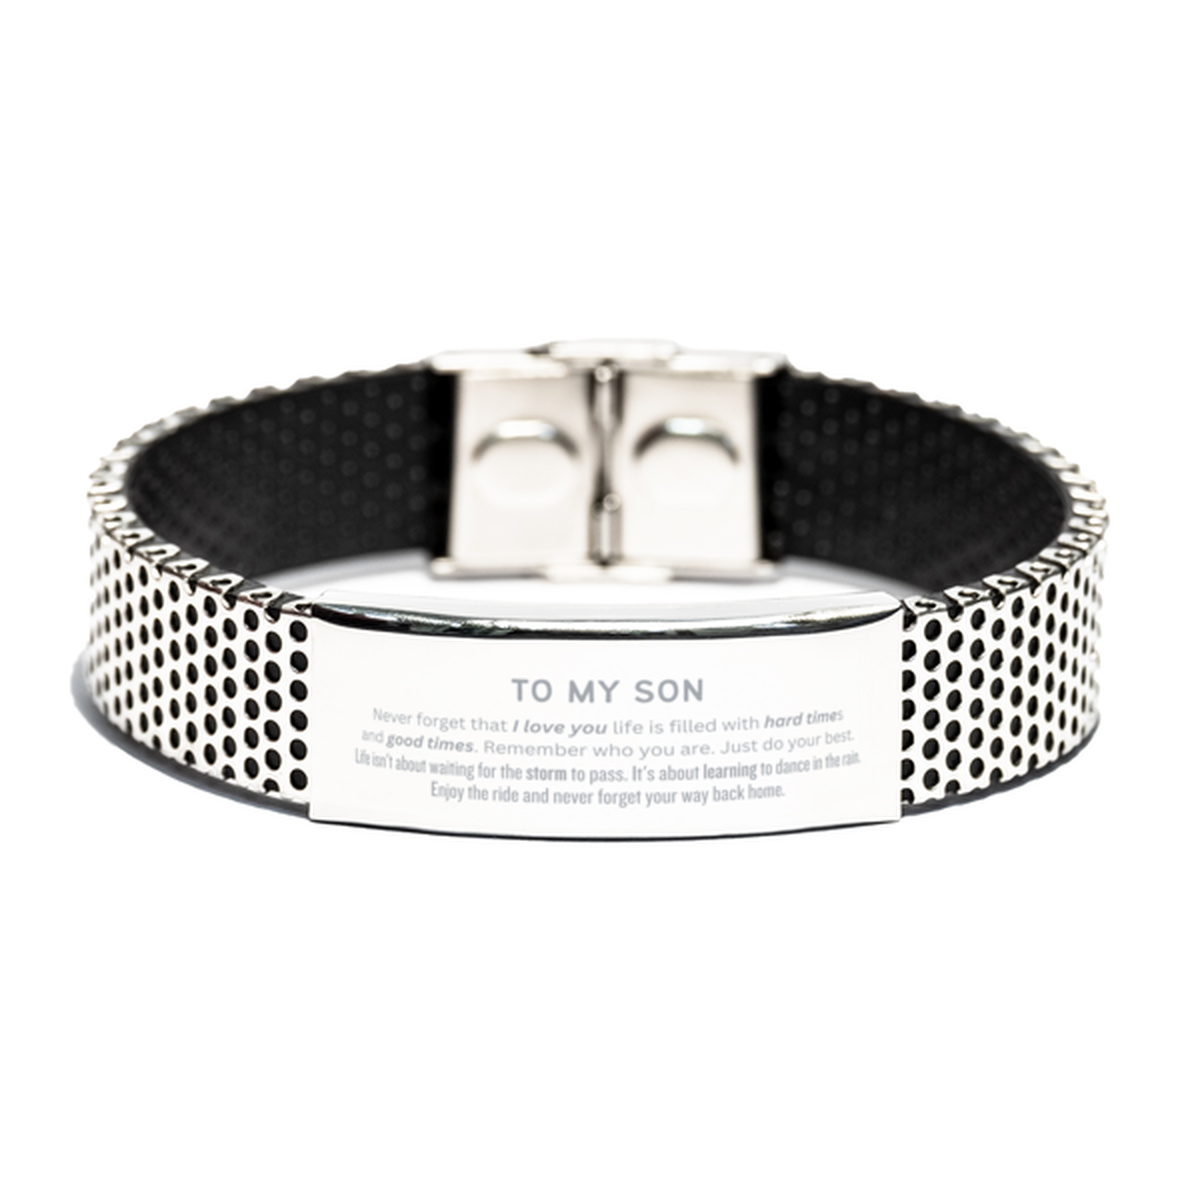 Christmas Son Stainless Steel Bracelet Gifts, To My Son Birthday Thank You Gifts For Son, Graduation Unique Gifts For Son To My Son Never forget that I love you life is filled with hard times and good times. Remember who you are. Just do your best